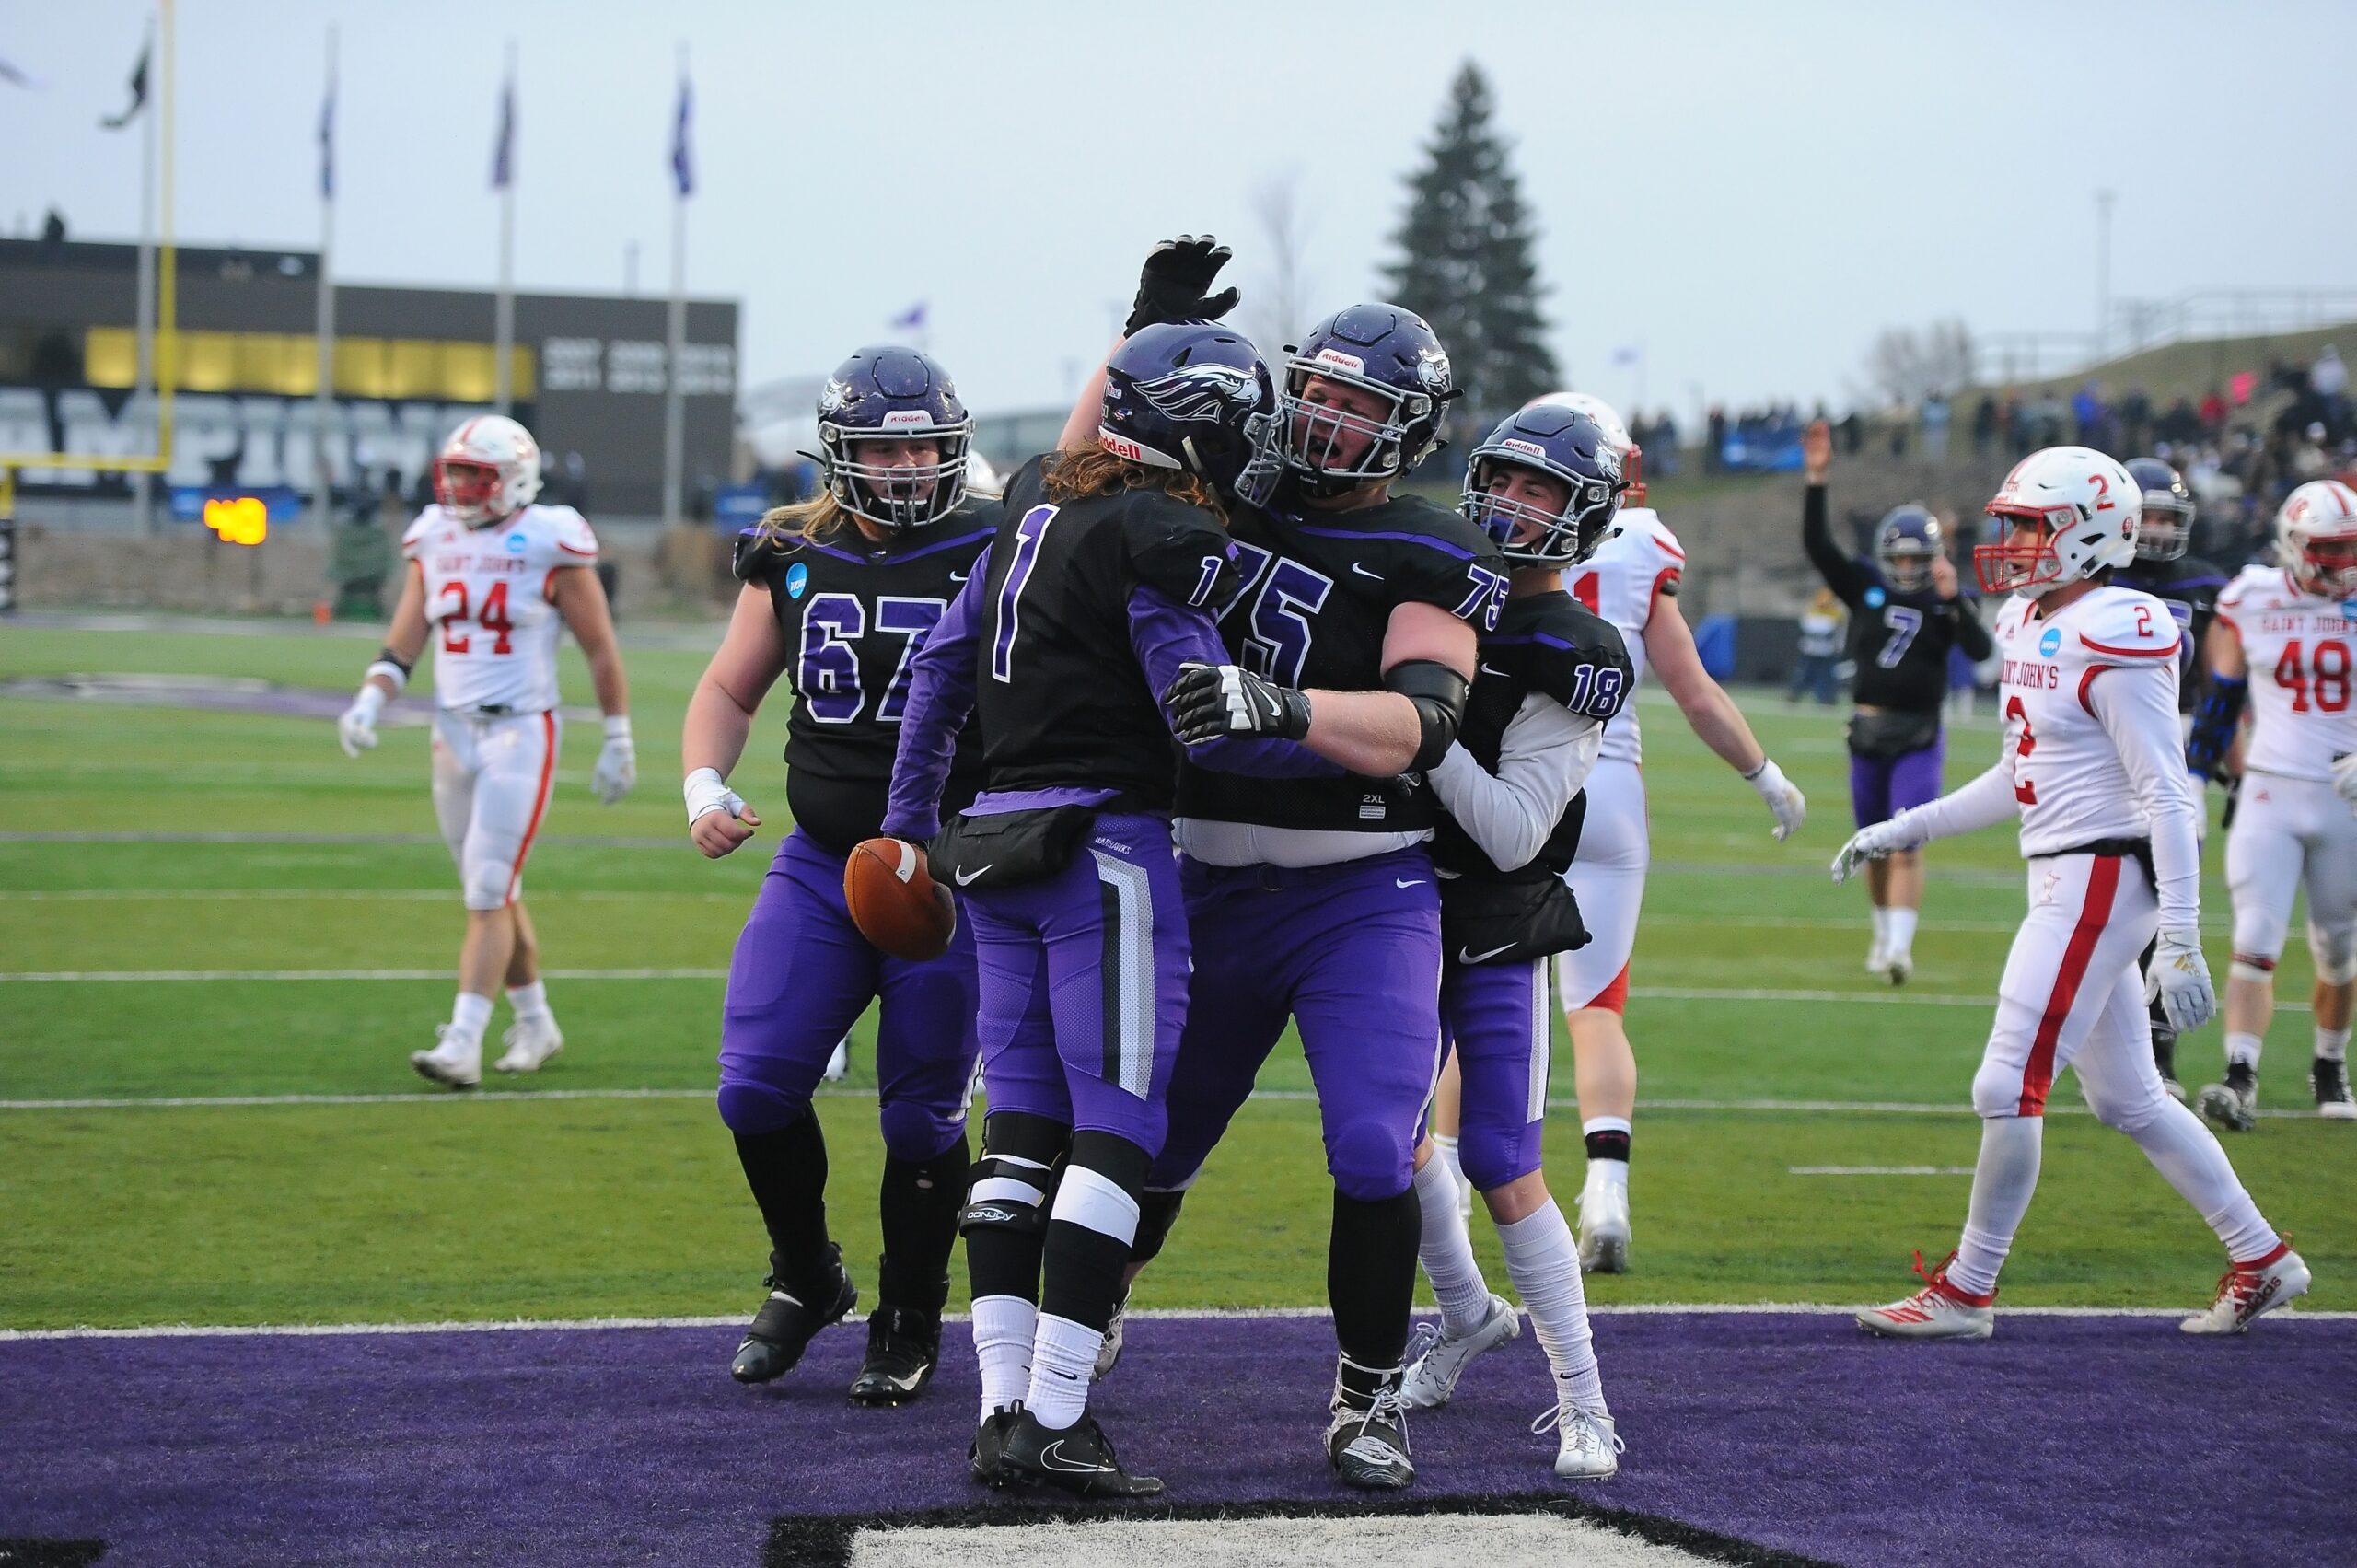 UW-Whitewater To Play In Its 10th Stagg Bowl